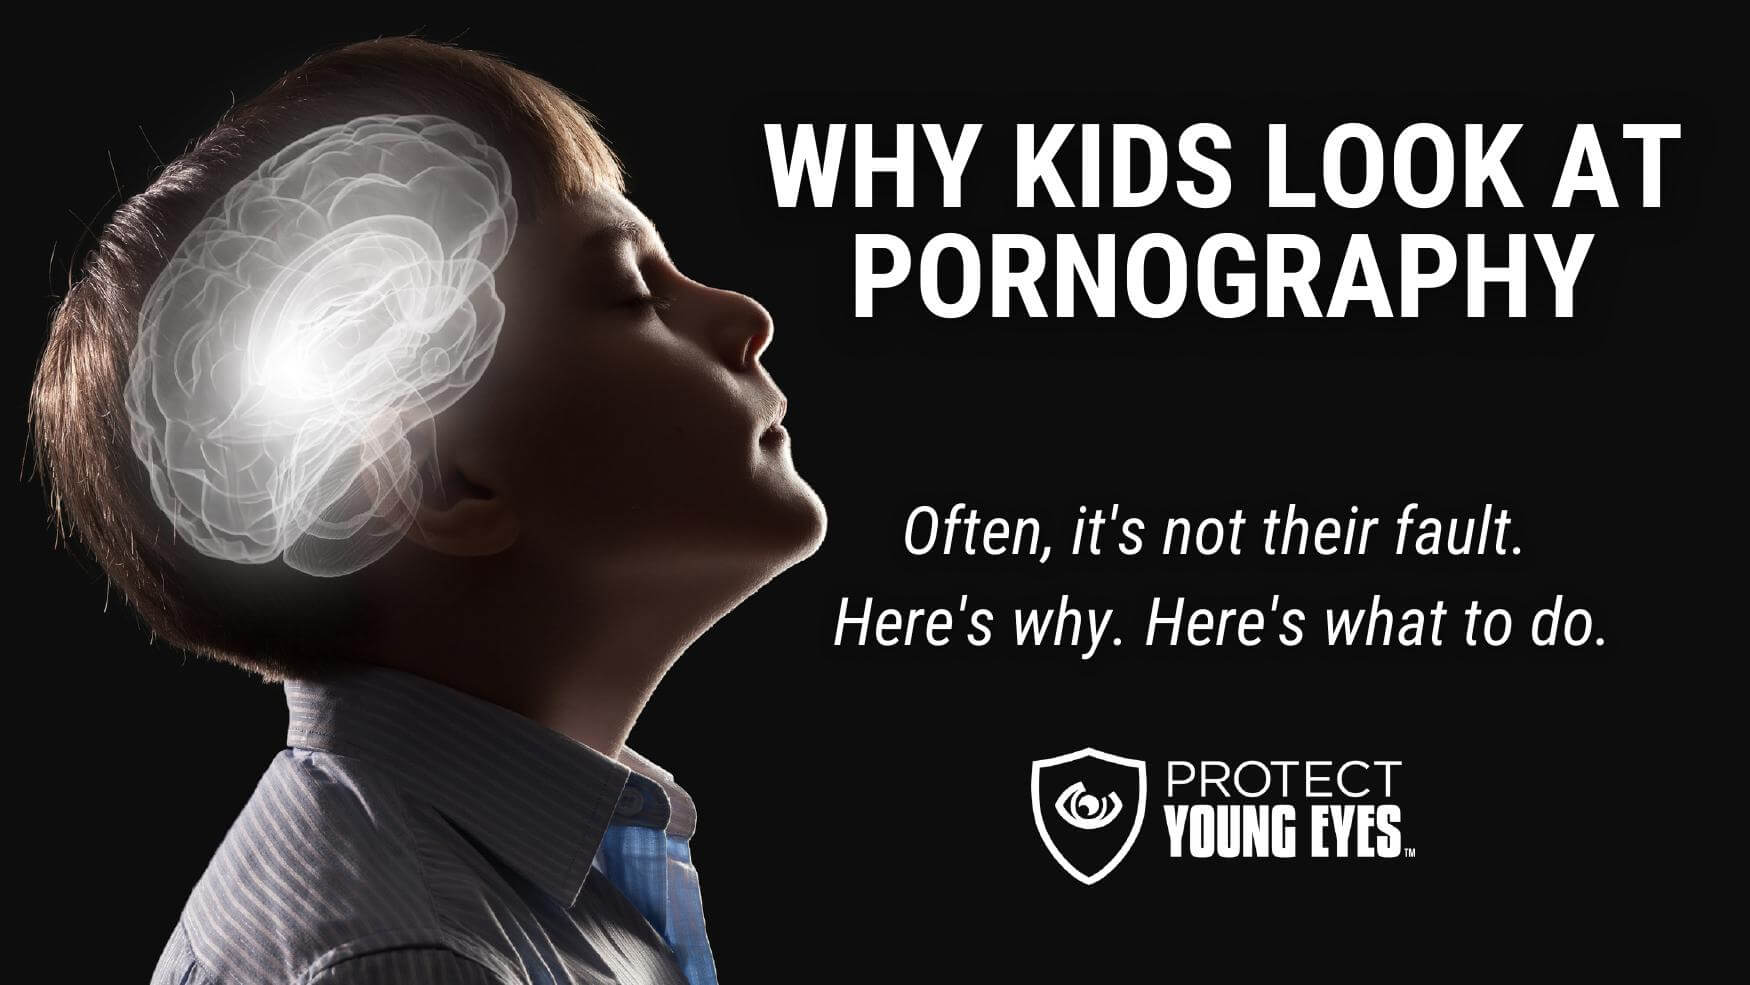 Why Kids Look at Pornography (It's not their fault) - Protect Young Eyes